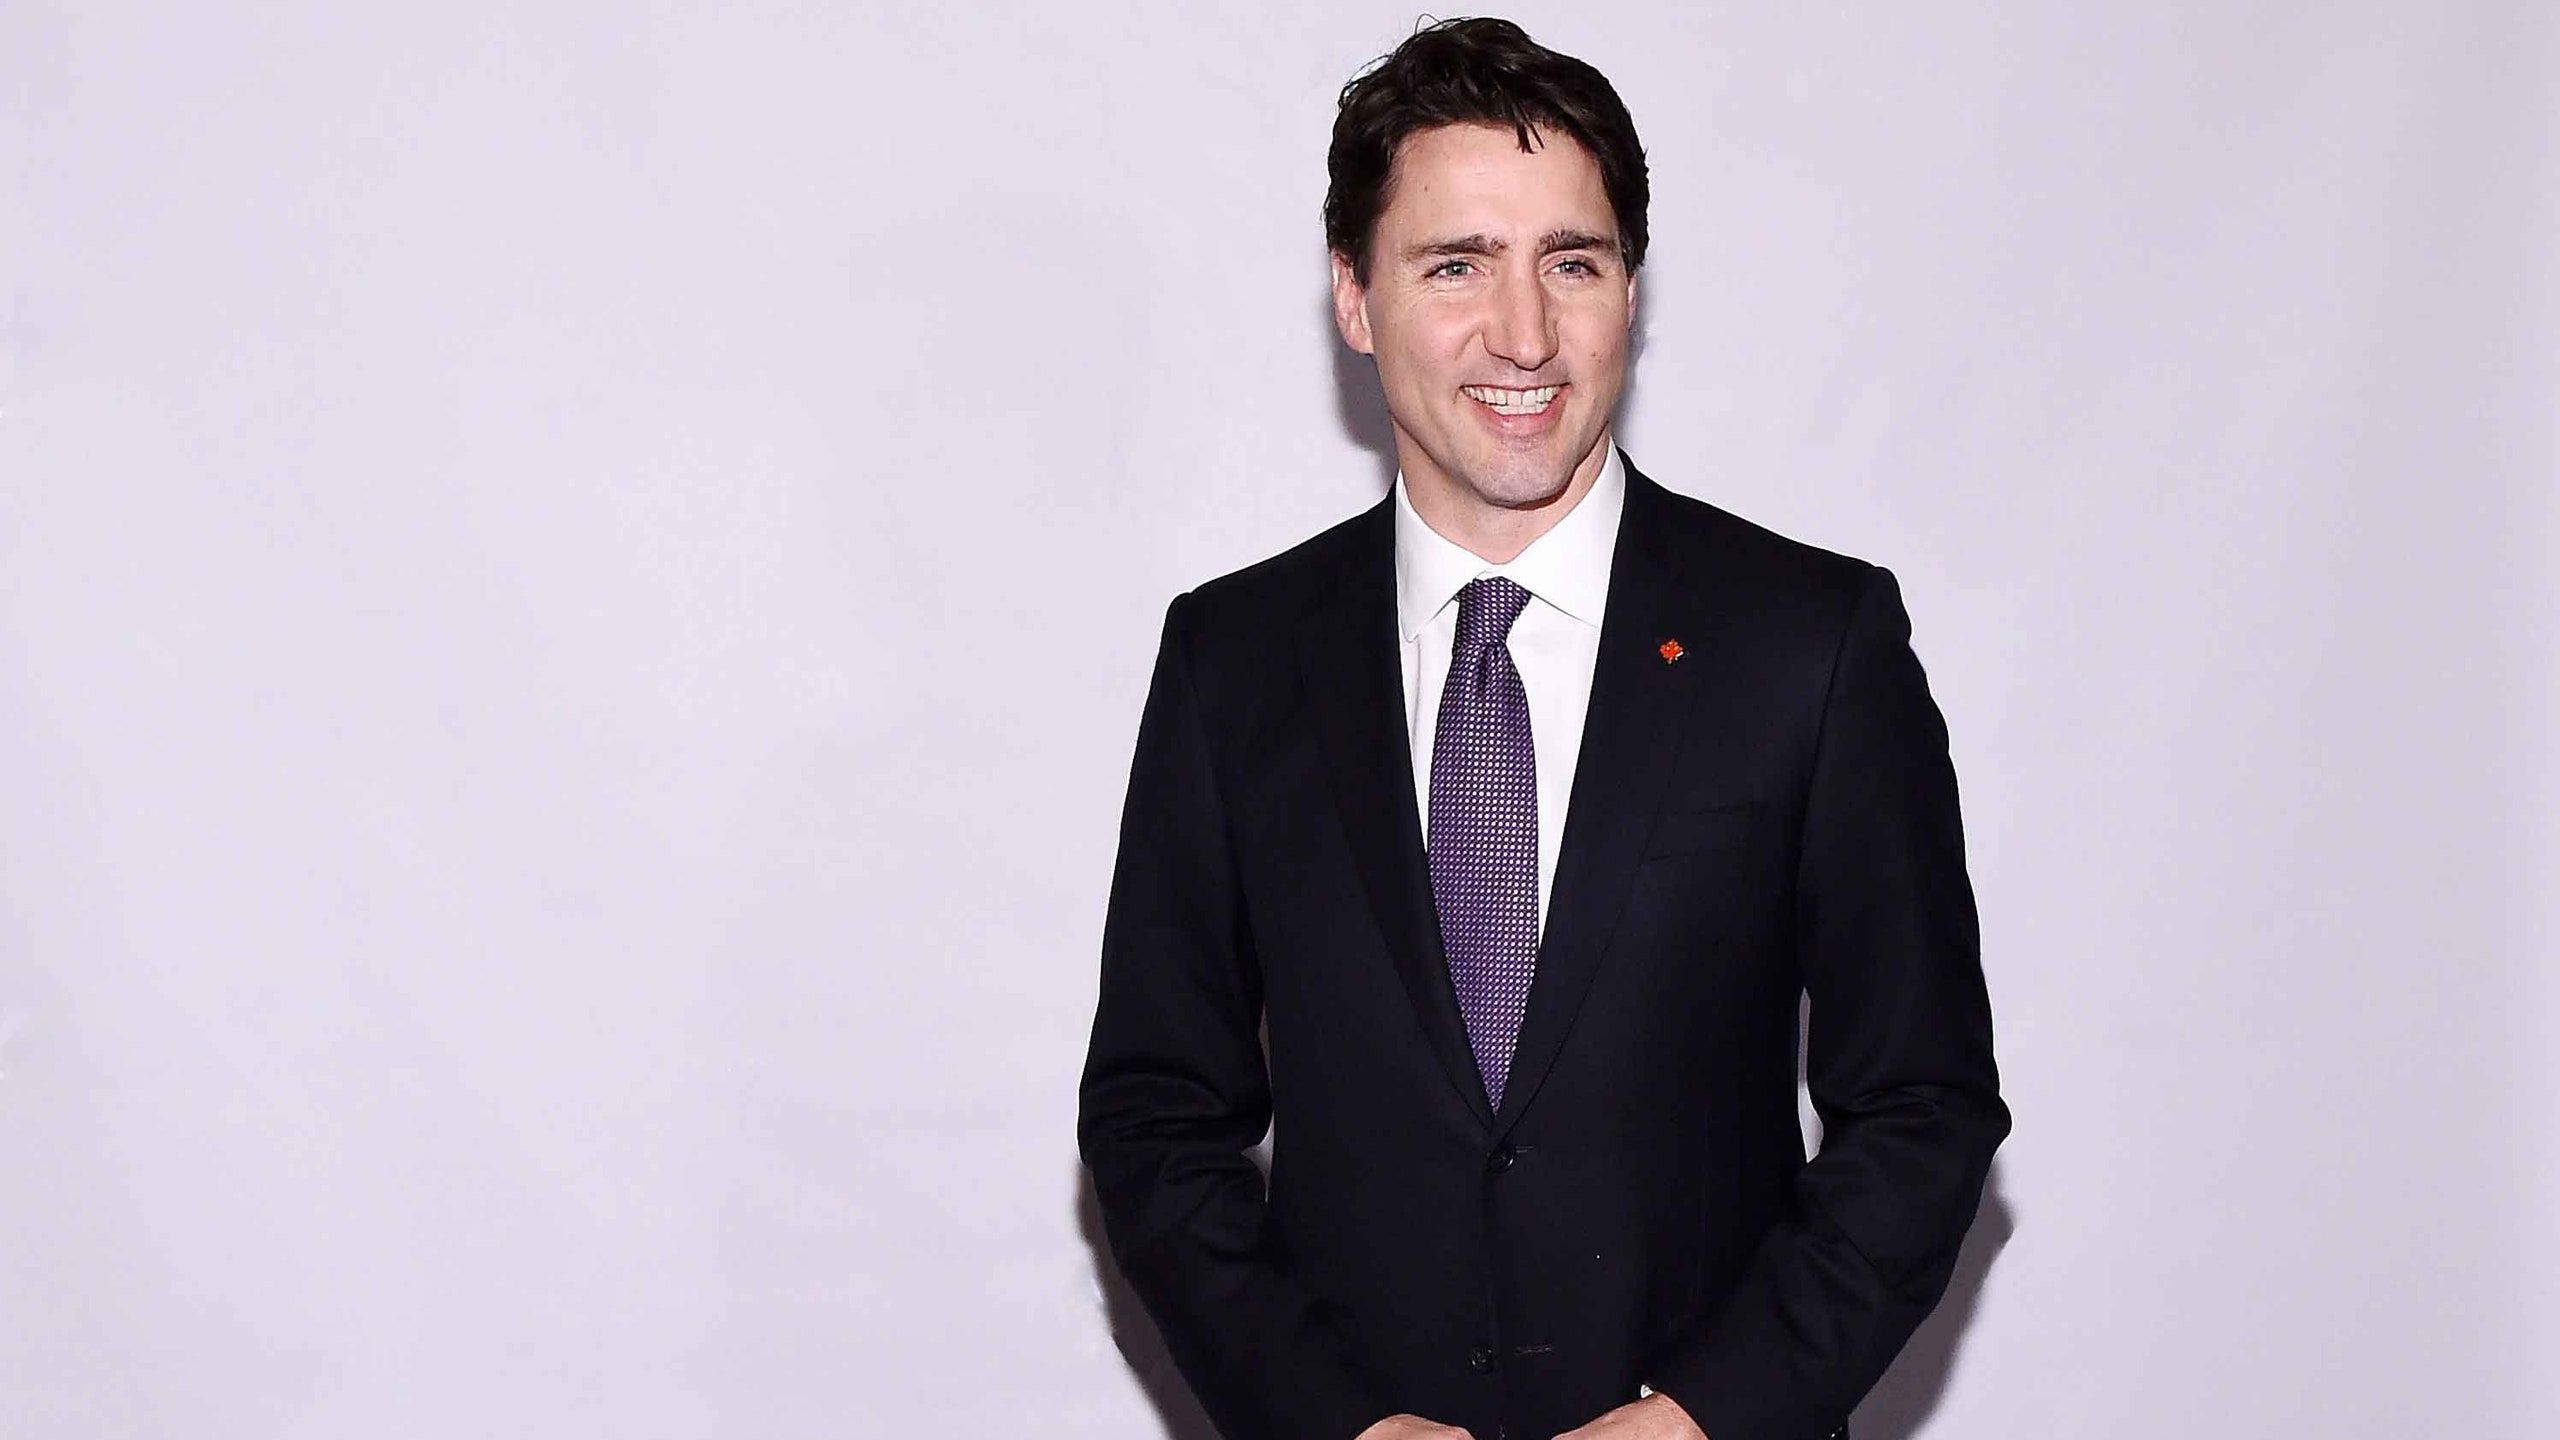 Justin Trudeau's Well Dressed American Tour Came To New York